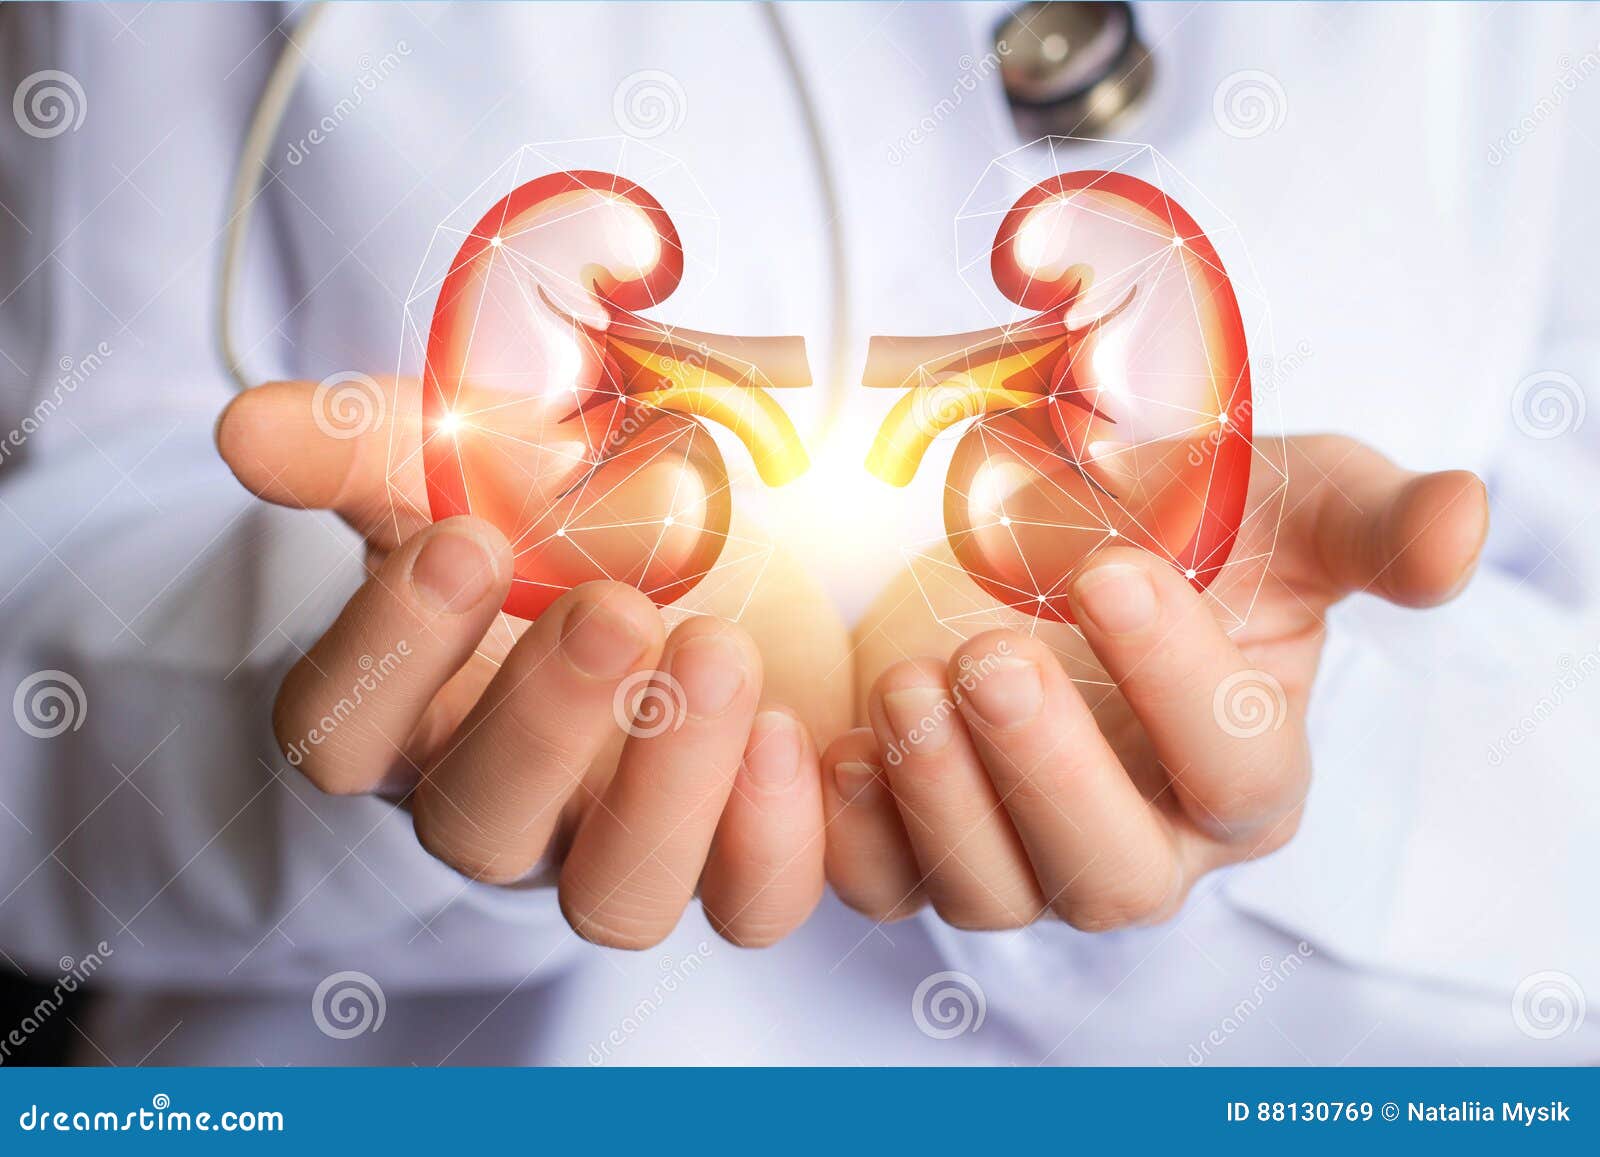 doctor supports kidneys healthy.